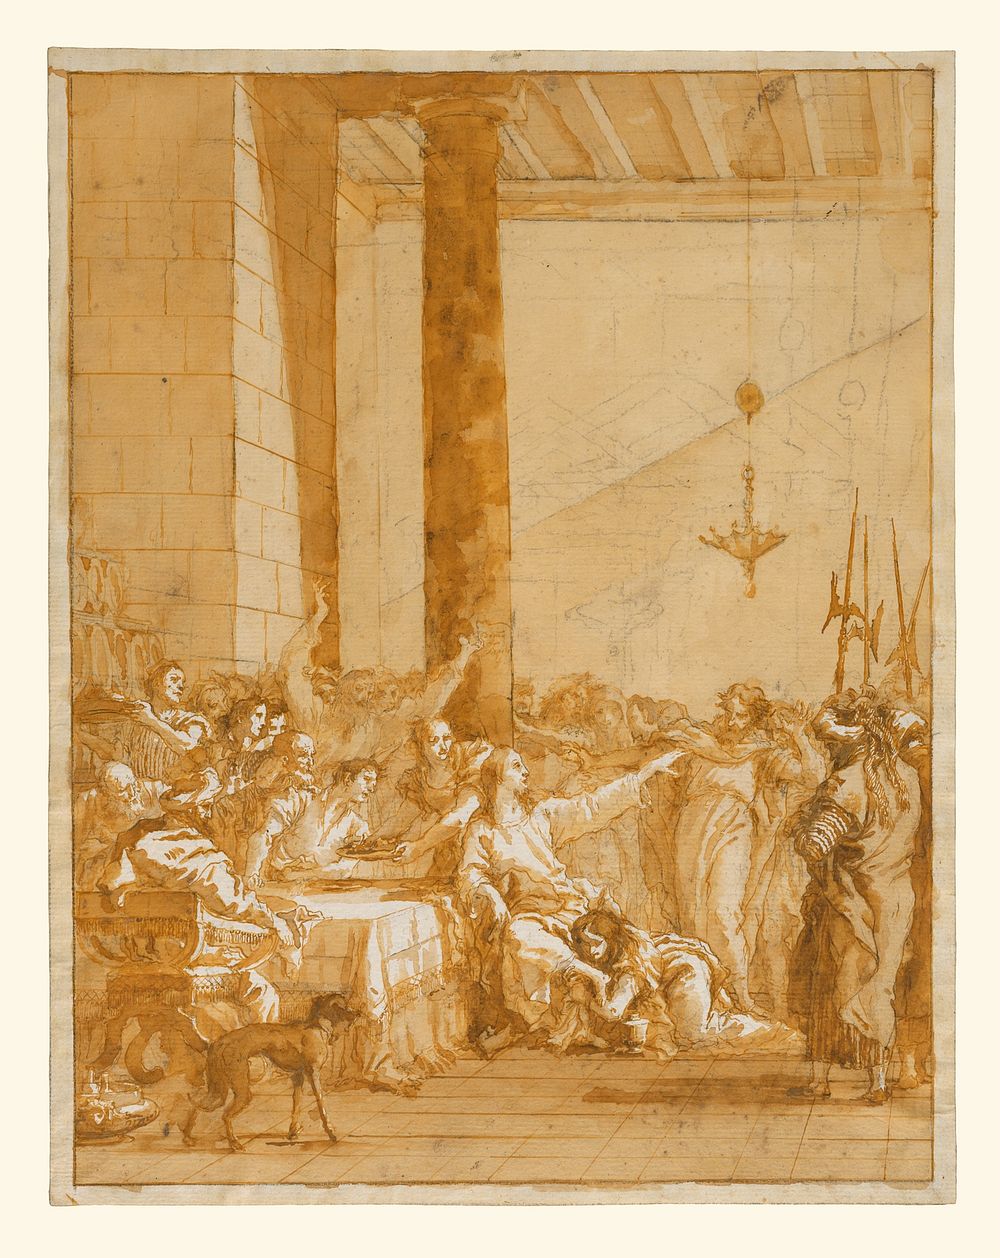 Christ at Supper with Simon the Pharisee, with the Anointment of Christ's Feet by Mary Magdalen by Giovanni Domenico Tiepolo